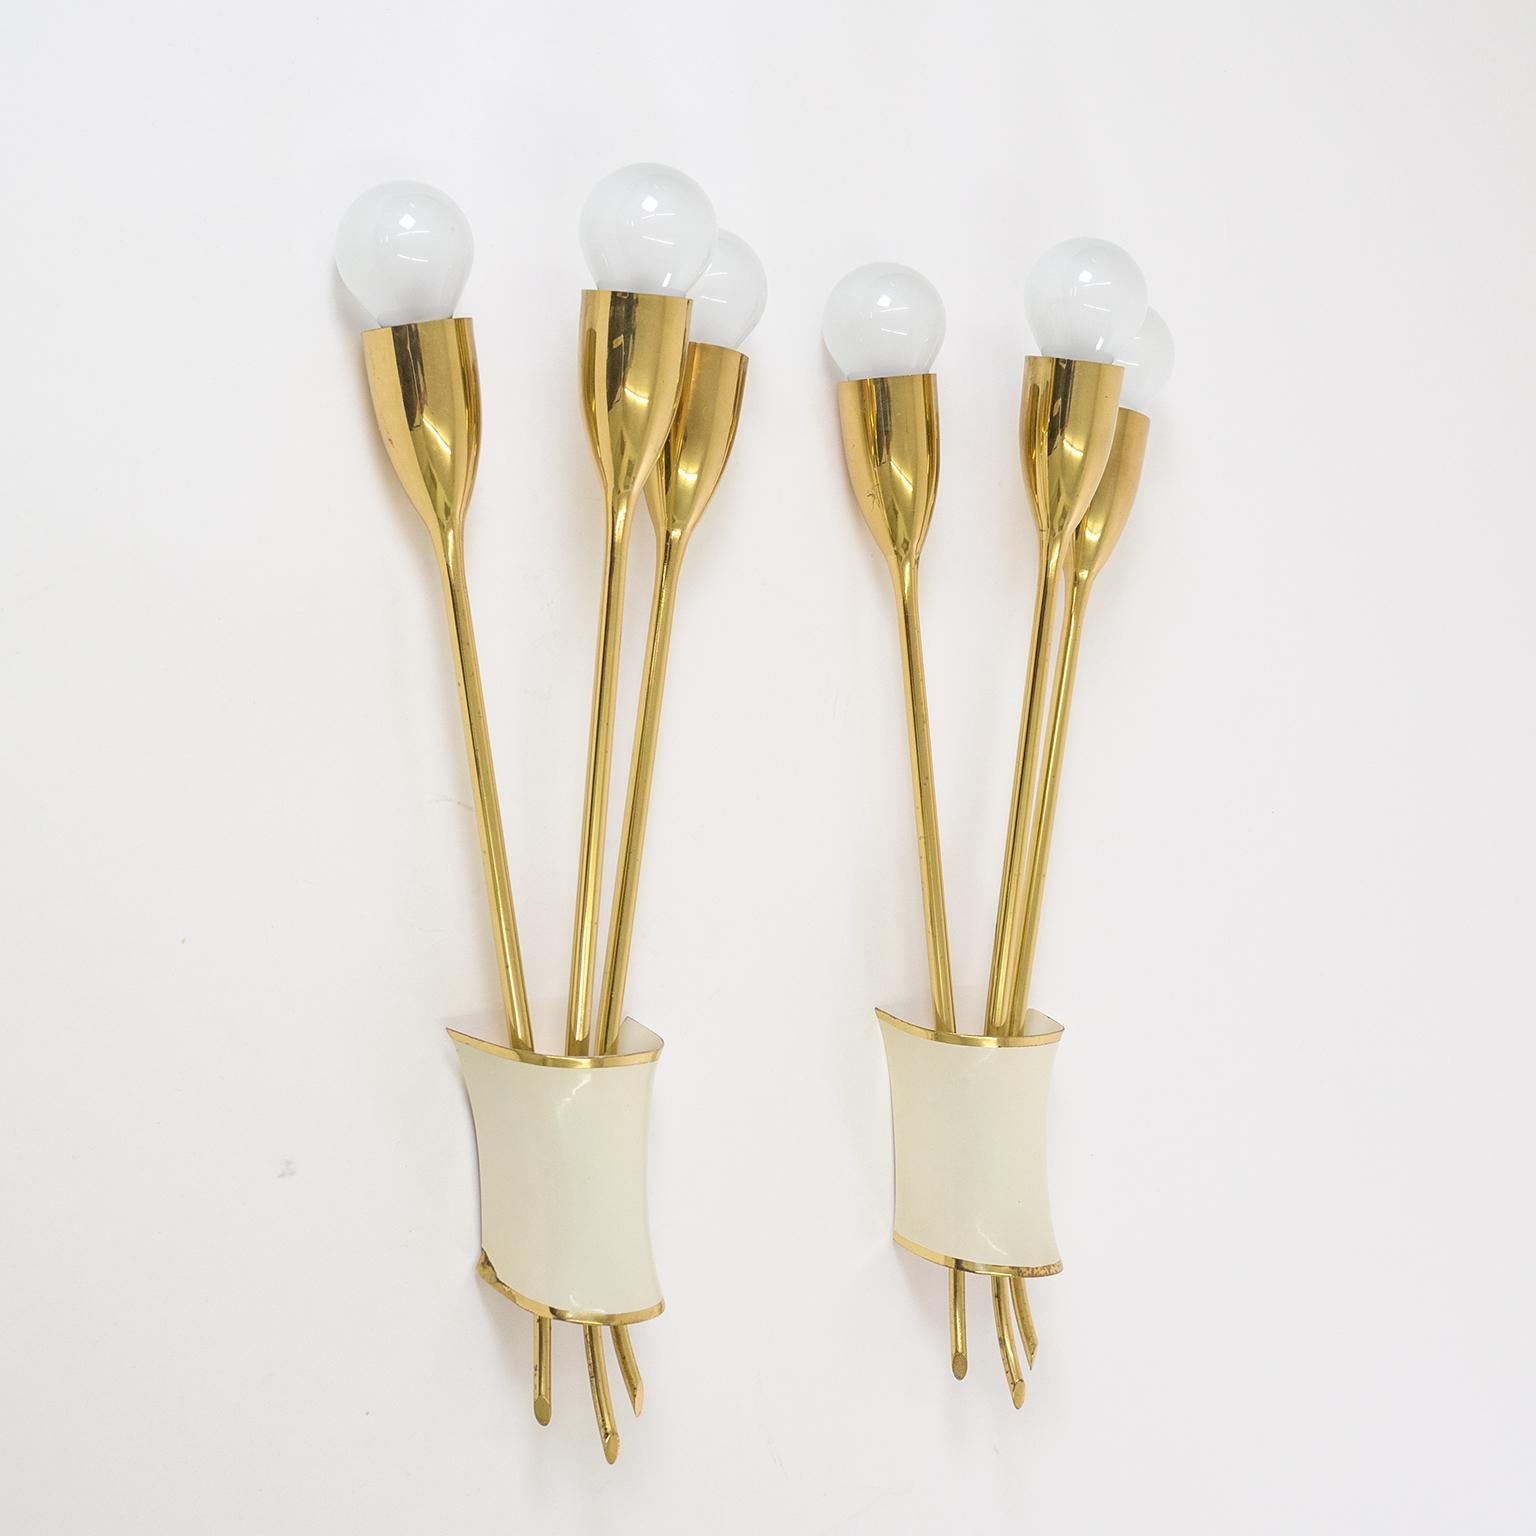 Beautiful brass sconces attributed to Kalmar, early 1950s. Made entirely of brass these three-arm sconces are gorgeously crafted. Note how the socket covers blend seamlessly into the stems. The brass cover which hides the wall support is lacquered